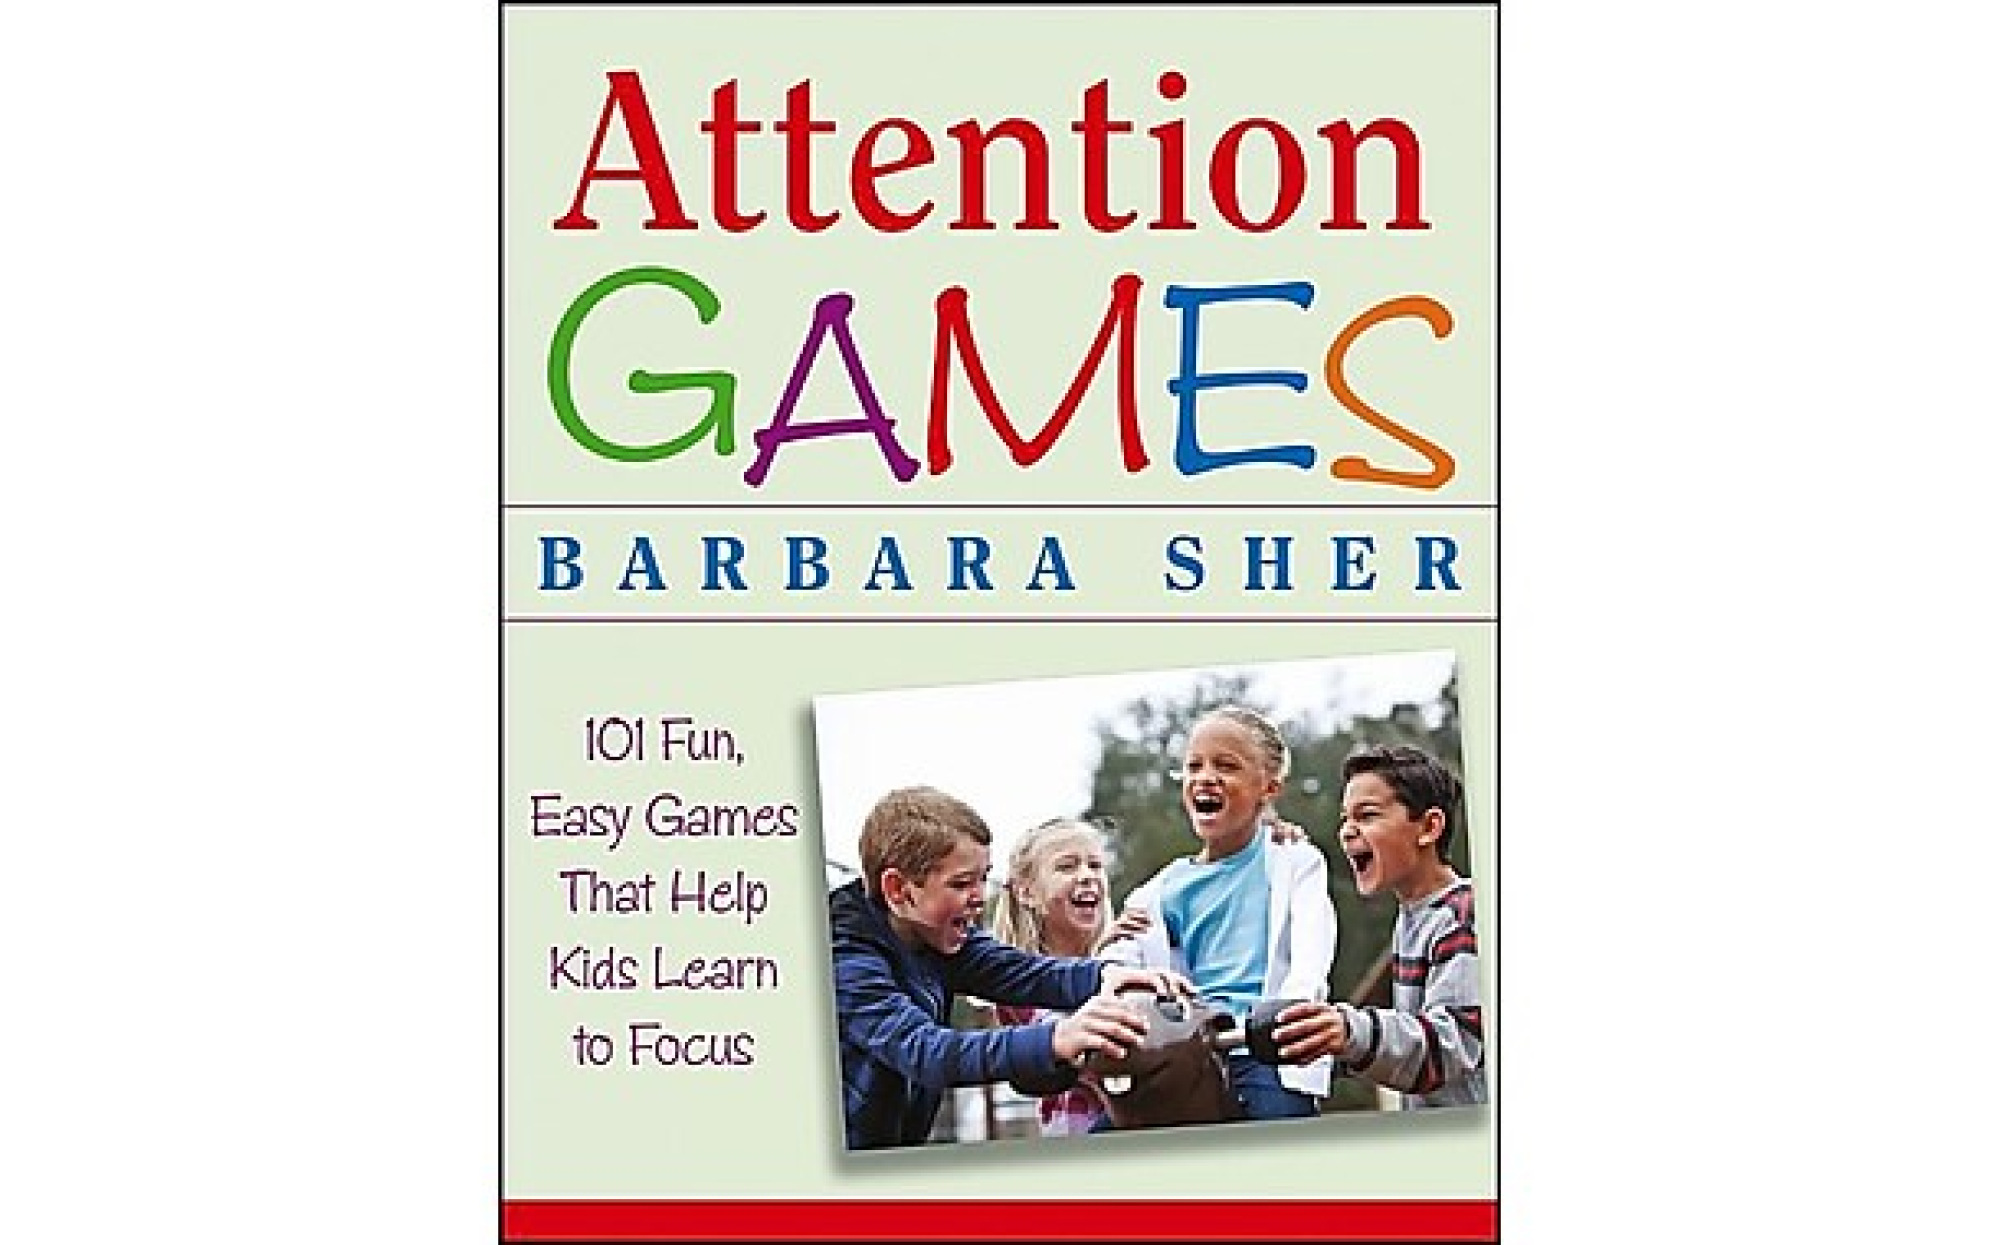 Attention game. Game for attention.